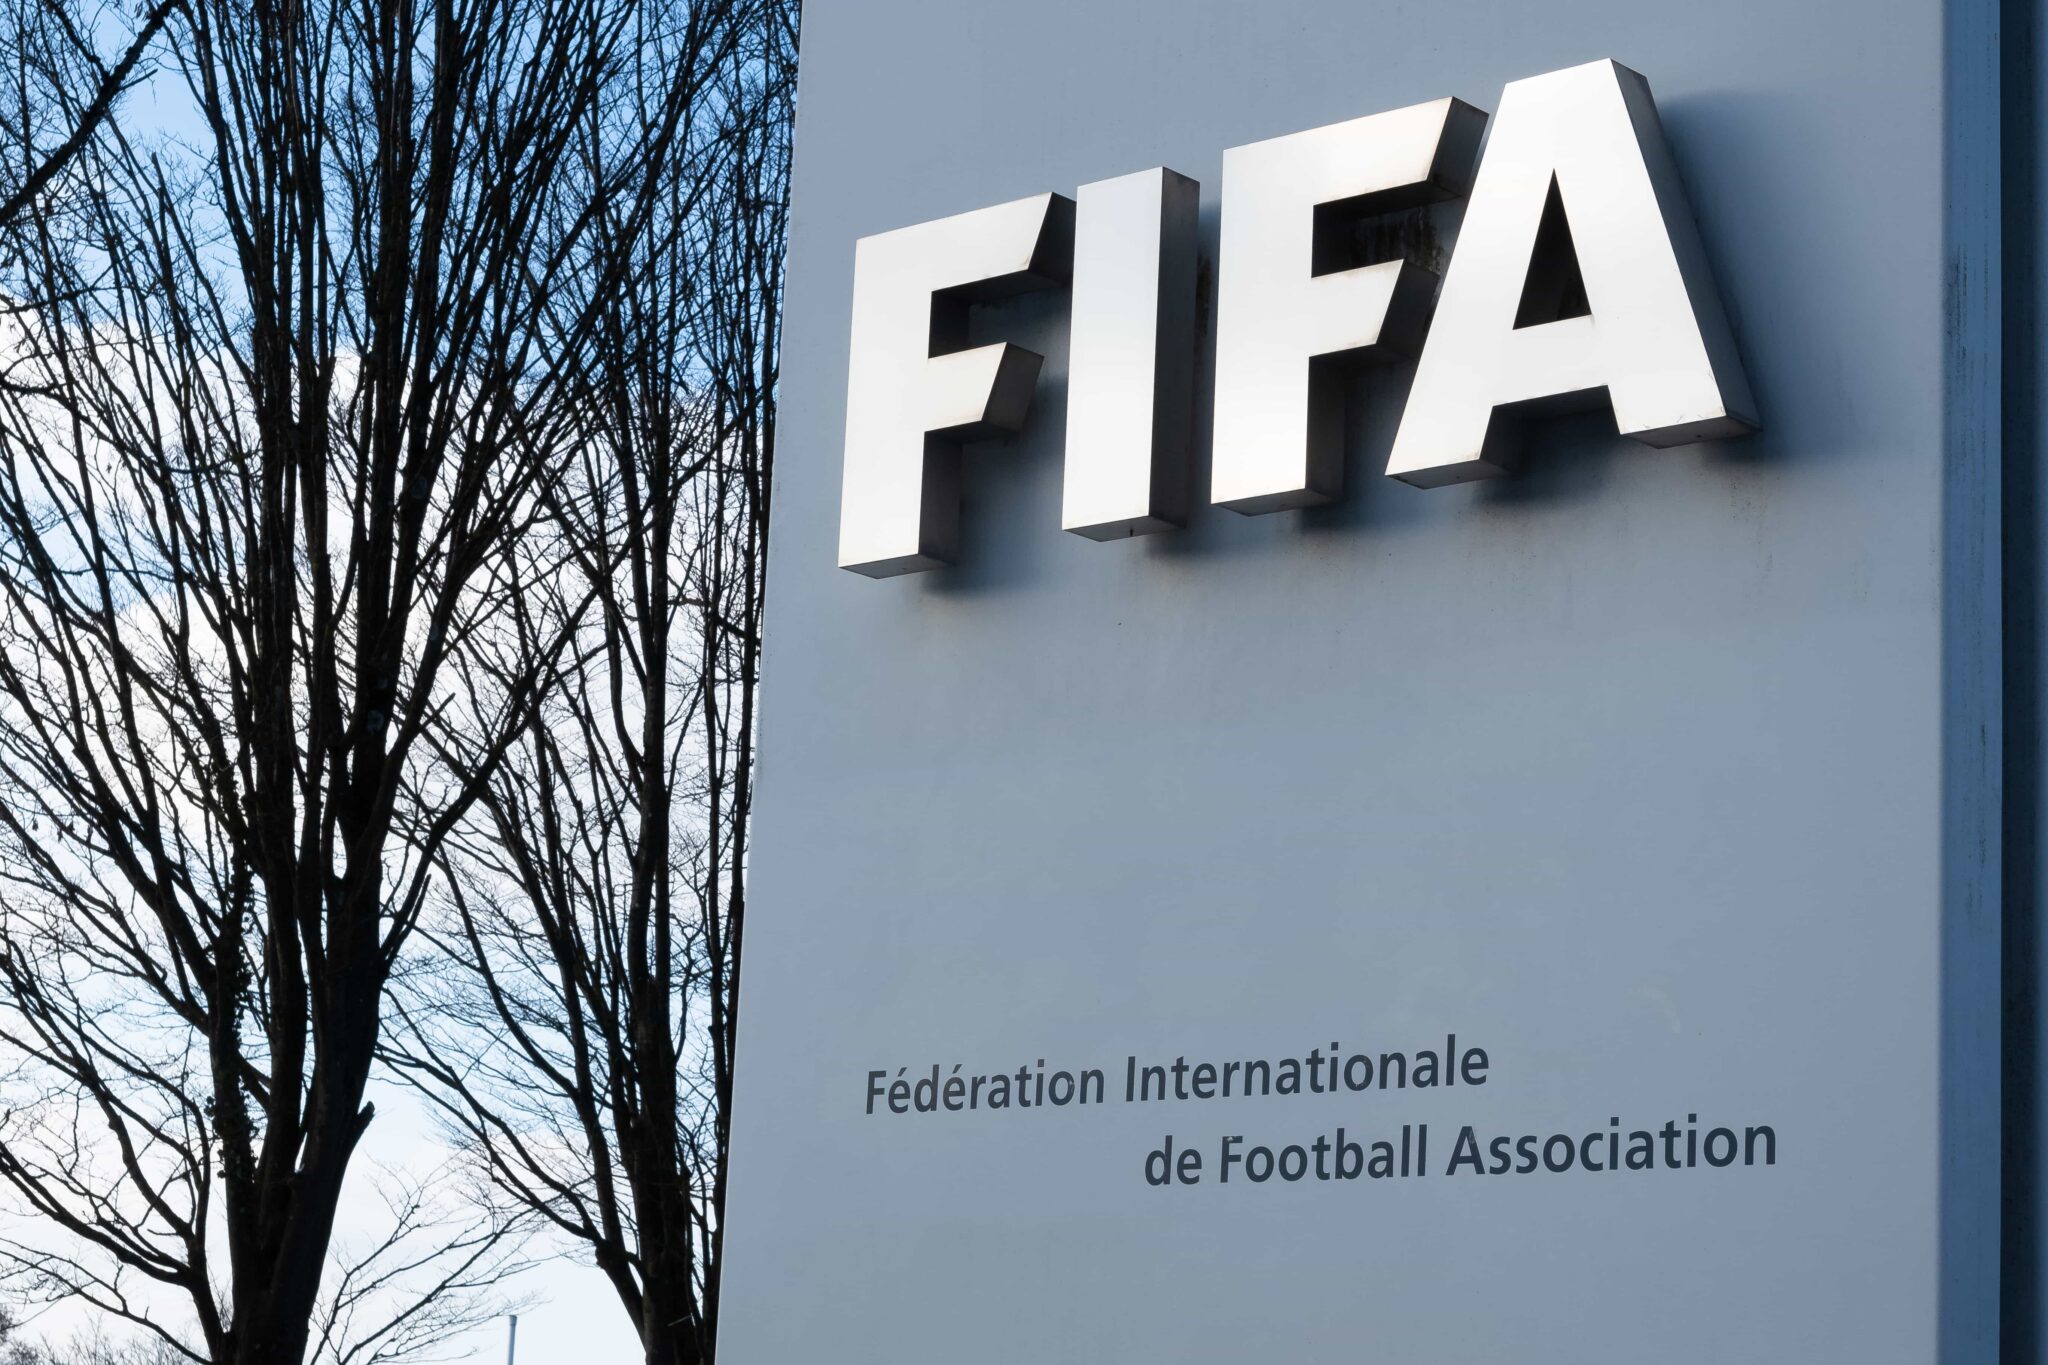 FIFA to Enter NFT Space with FIFA+ Collect Platform